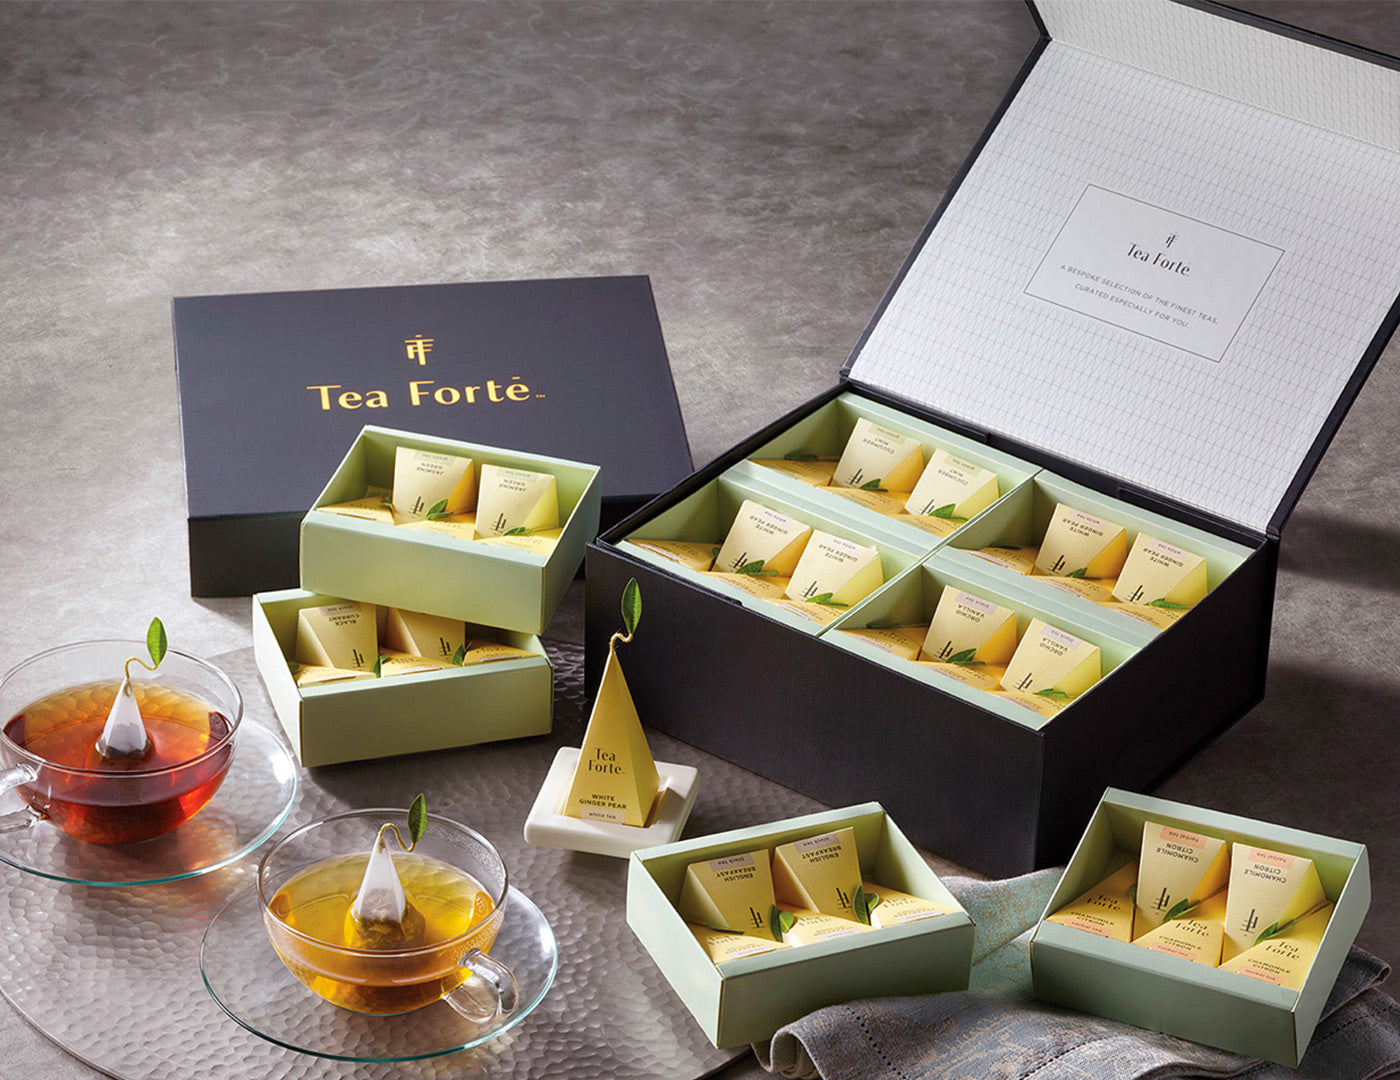 Tea Forté Select Chest of 40 pyramid tea infusers, open  on a table with glass teacups